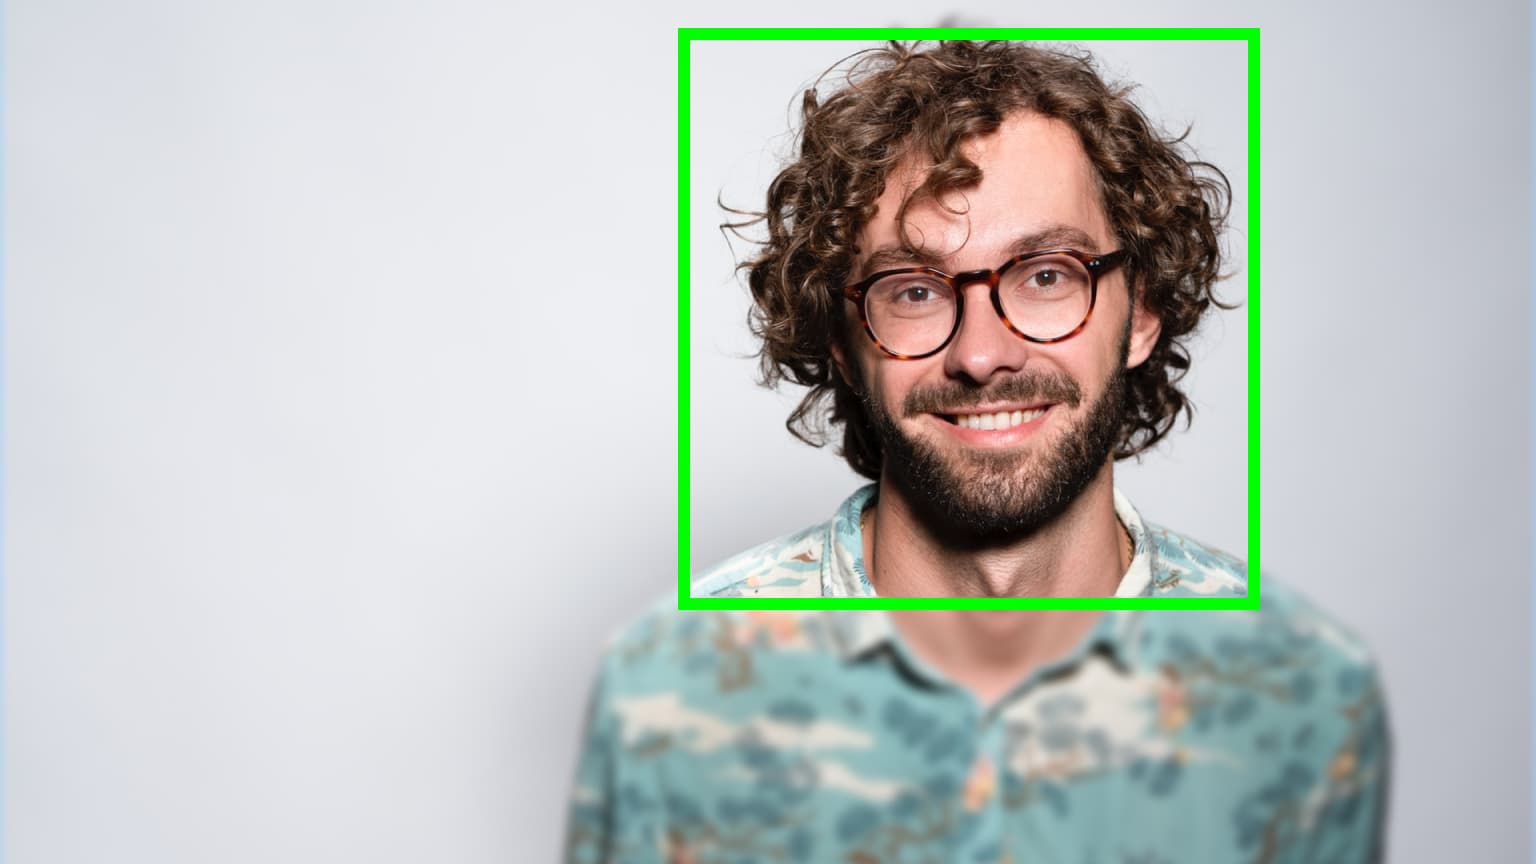 How to Authenticate a User with Face Recognition in React.js